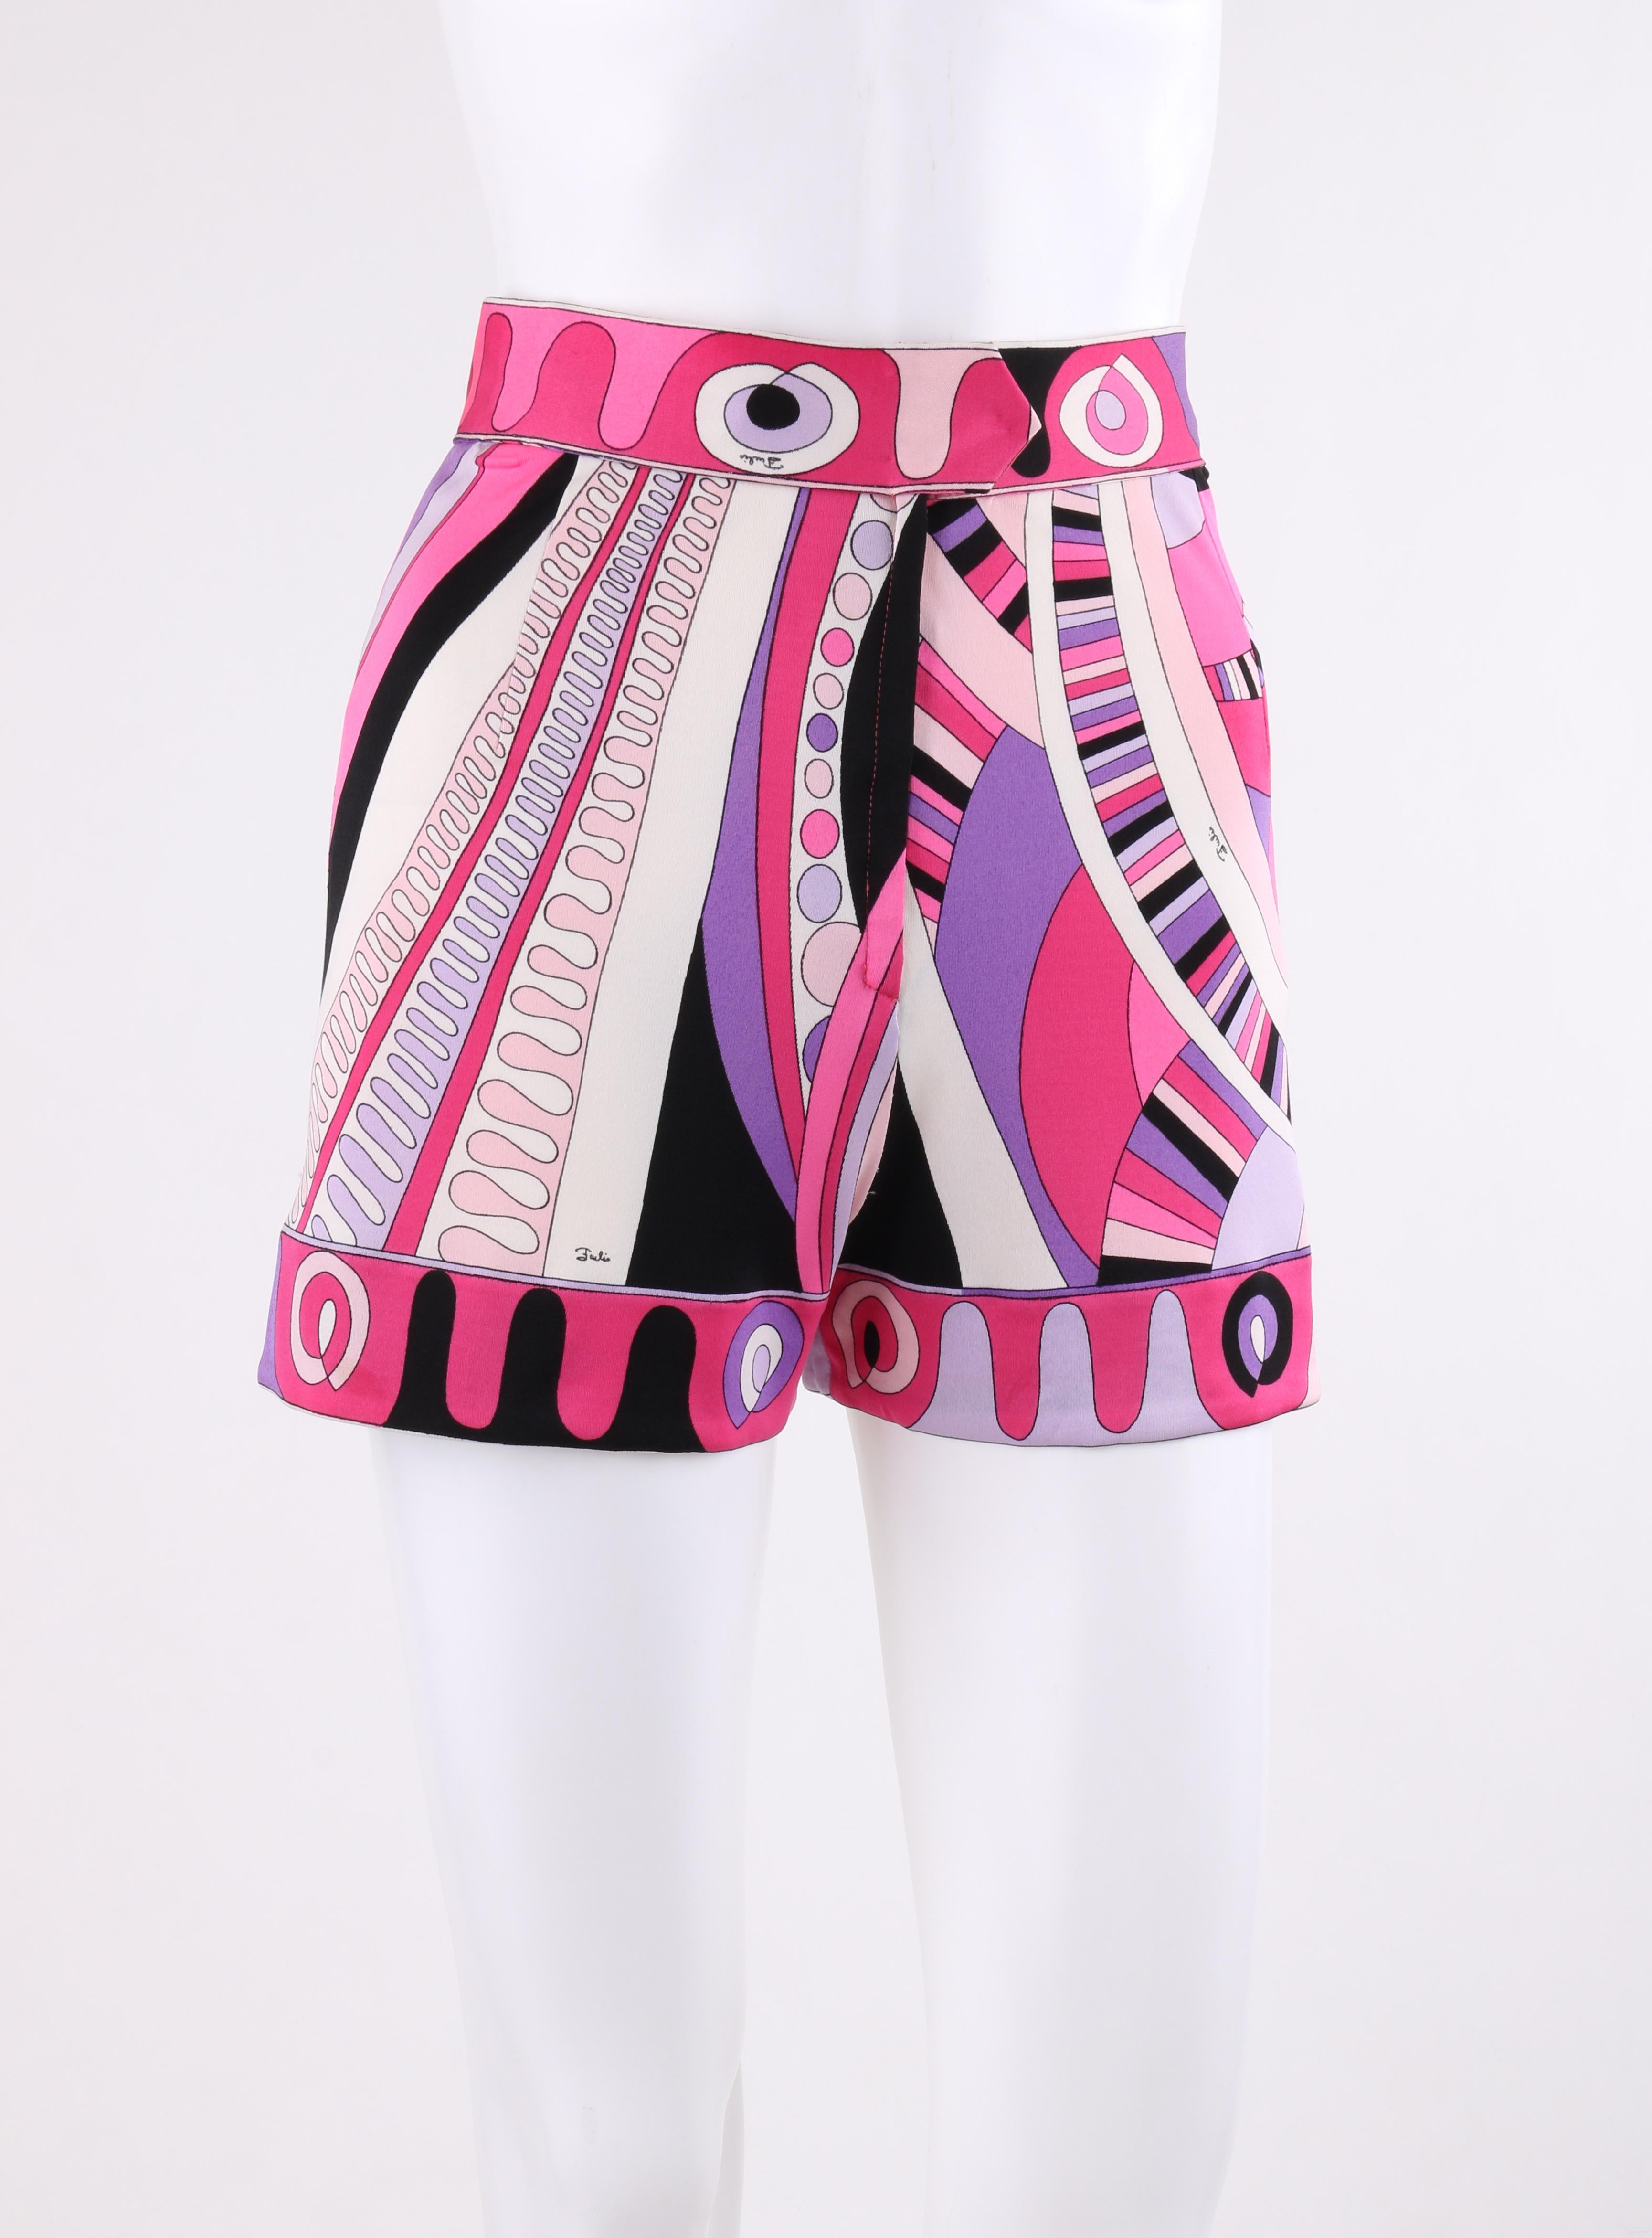 DESCRIPTION: EMILIO PUCCI c.1970's Pink Op Art Signature Print Silk Jersey Knit Shorts
 
Circa: c.1970’s
Label(s): Emilio Pucci
Designer: Emilio Pucci
Style: Shorts
Color(s): Multi in shades of pink, purple, black, and white. 
Lined: No
Marked